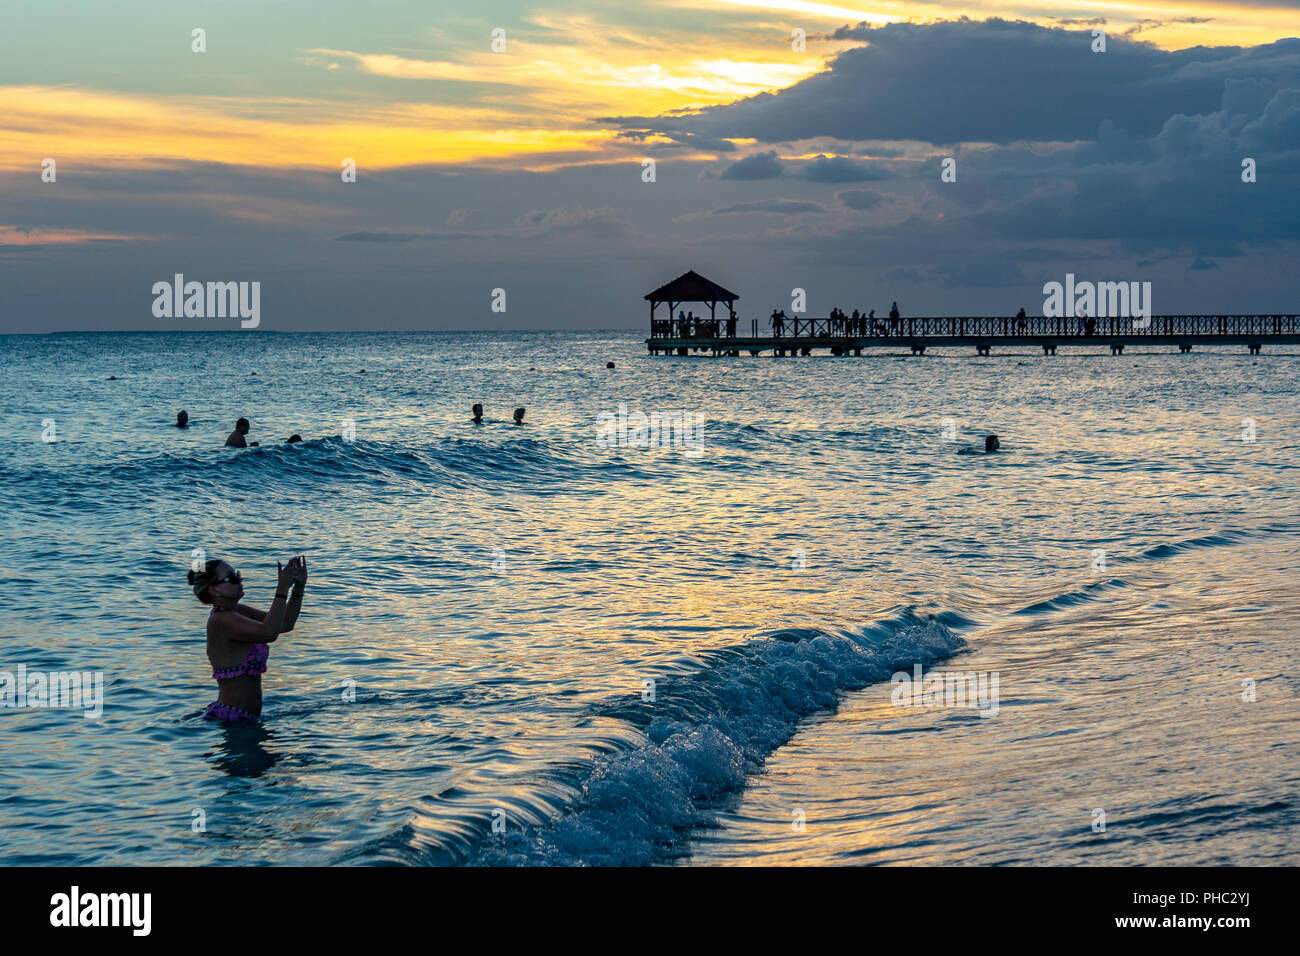 Bayahibe, Dominican Republic, 26 August 2018. A woman takes a selfie from the warm waters at sunset while vacationing at a Caribbean resort in the Dom Stock Photo